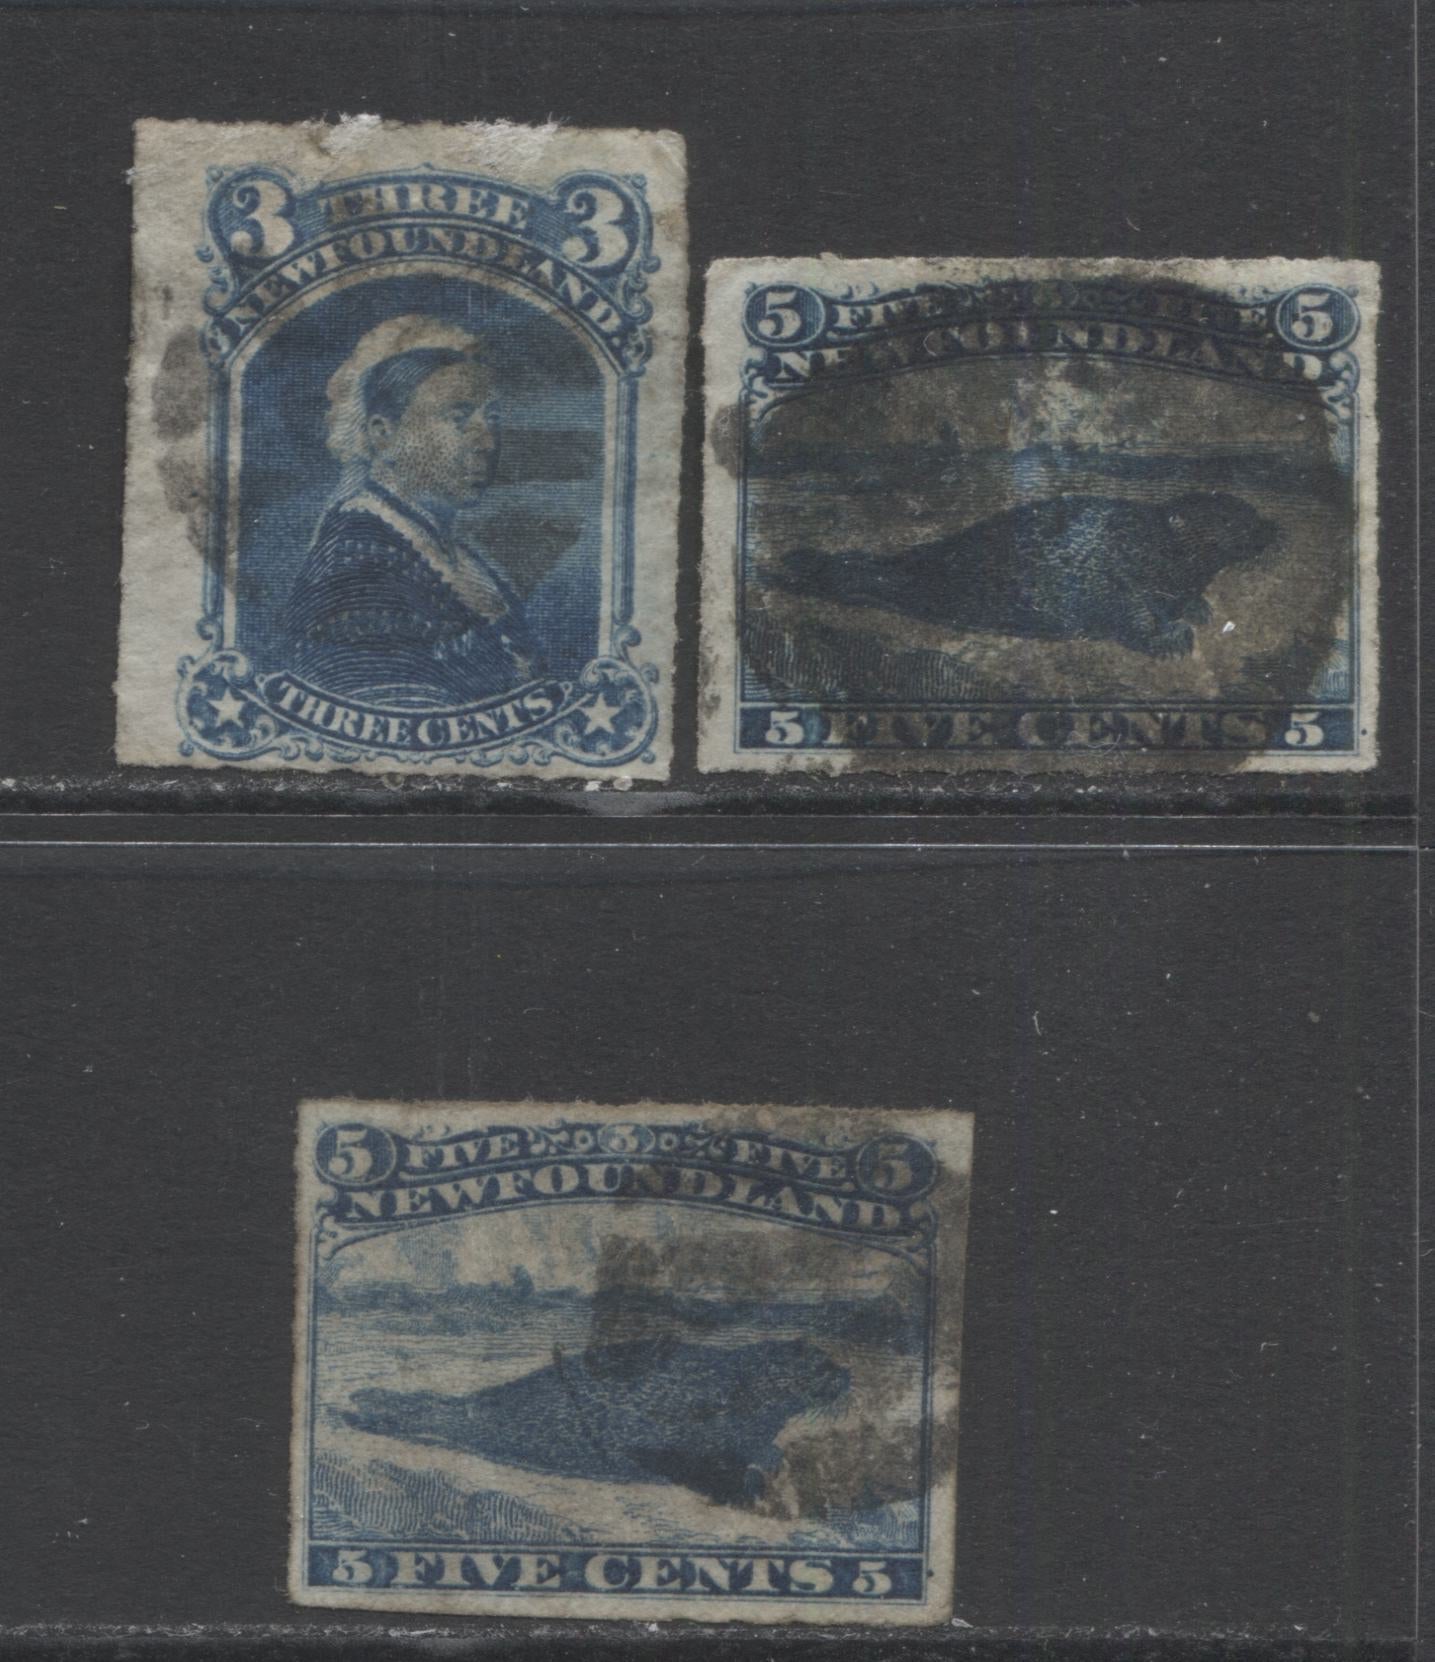 Lot 324 Newfoundland #39, 40 3c & 5c Blue Queen Victoria & Harpseal, 1876-1879 Rouletted Issues, 3 VG and Fine Used Singles